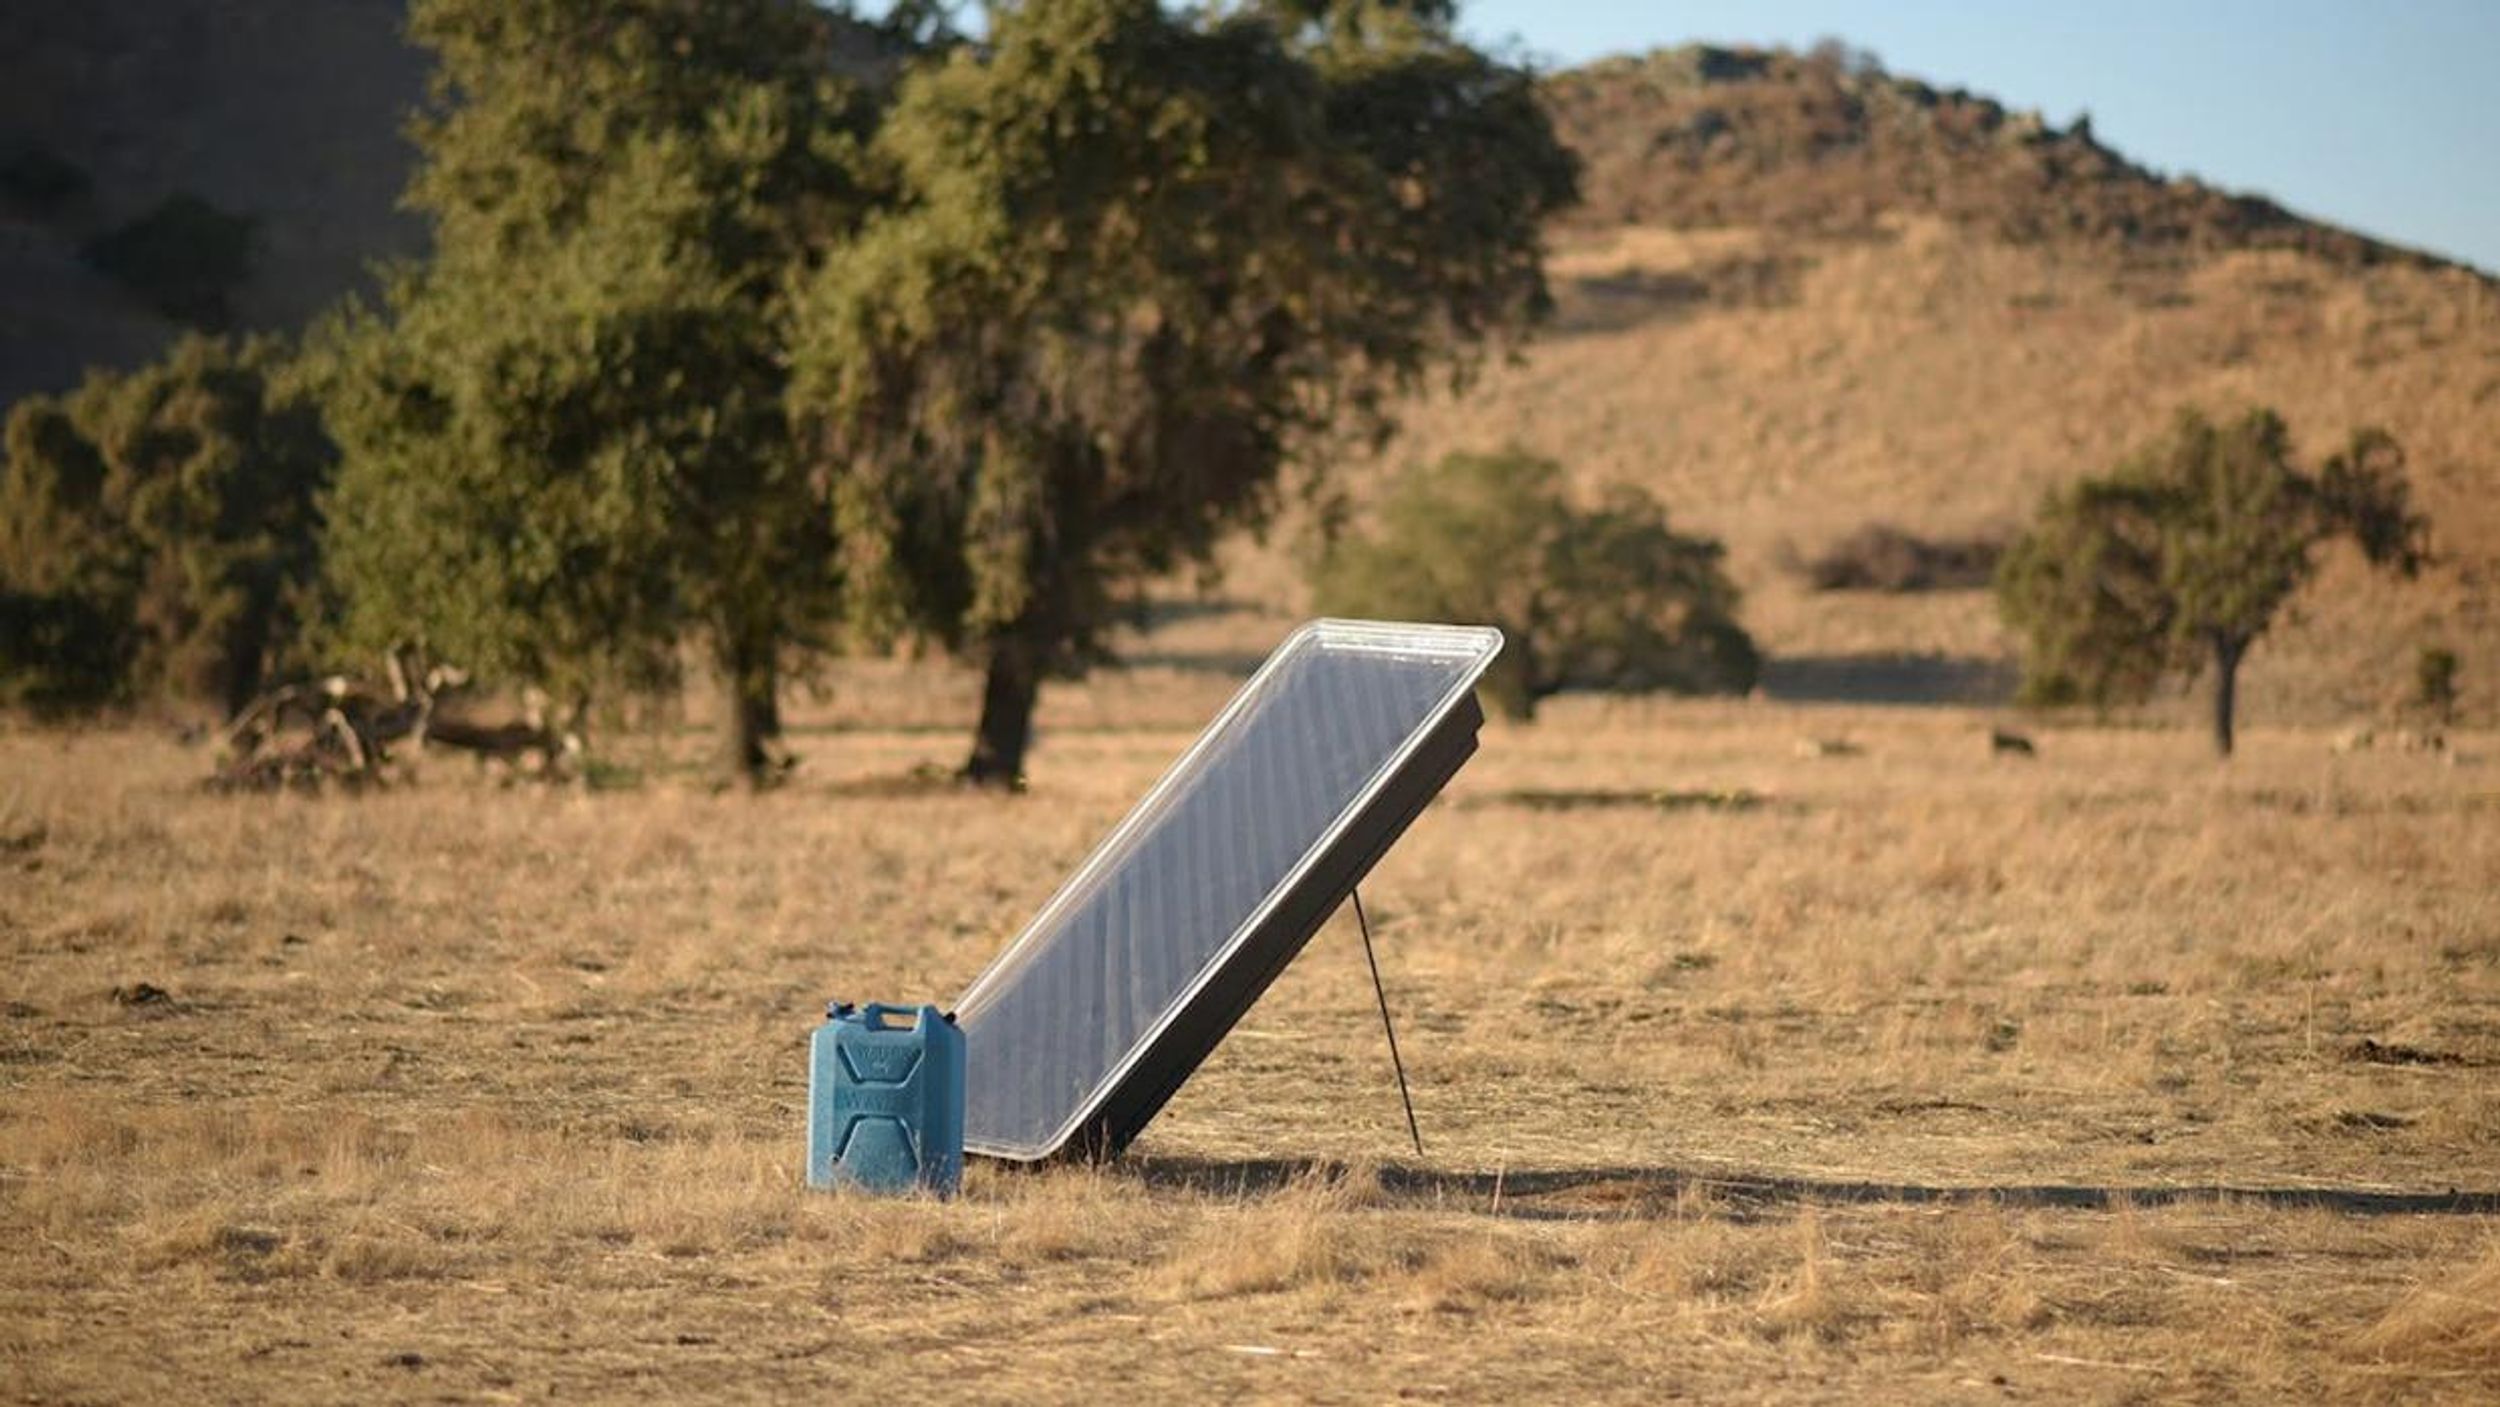 image of dry, summery landscape with water jug and solar water collector device propped up to point at the sun